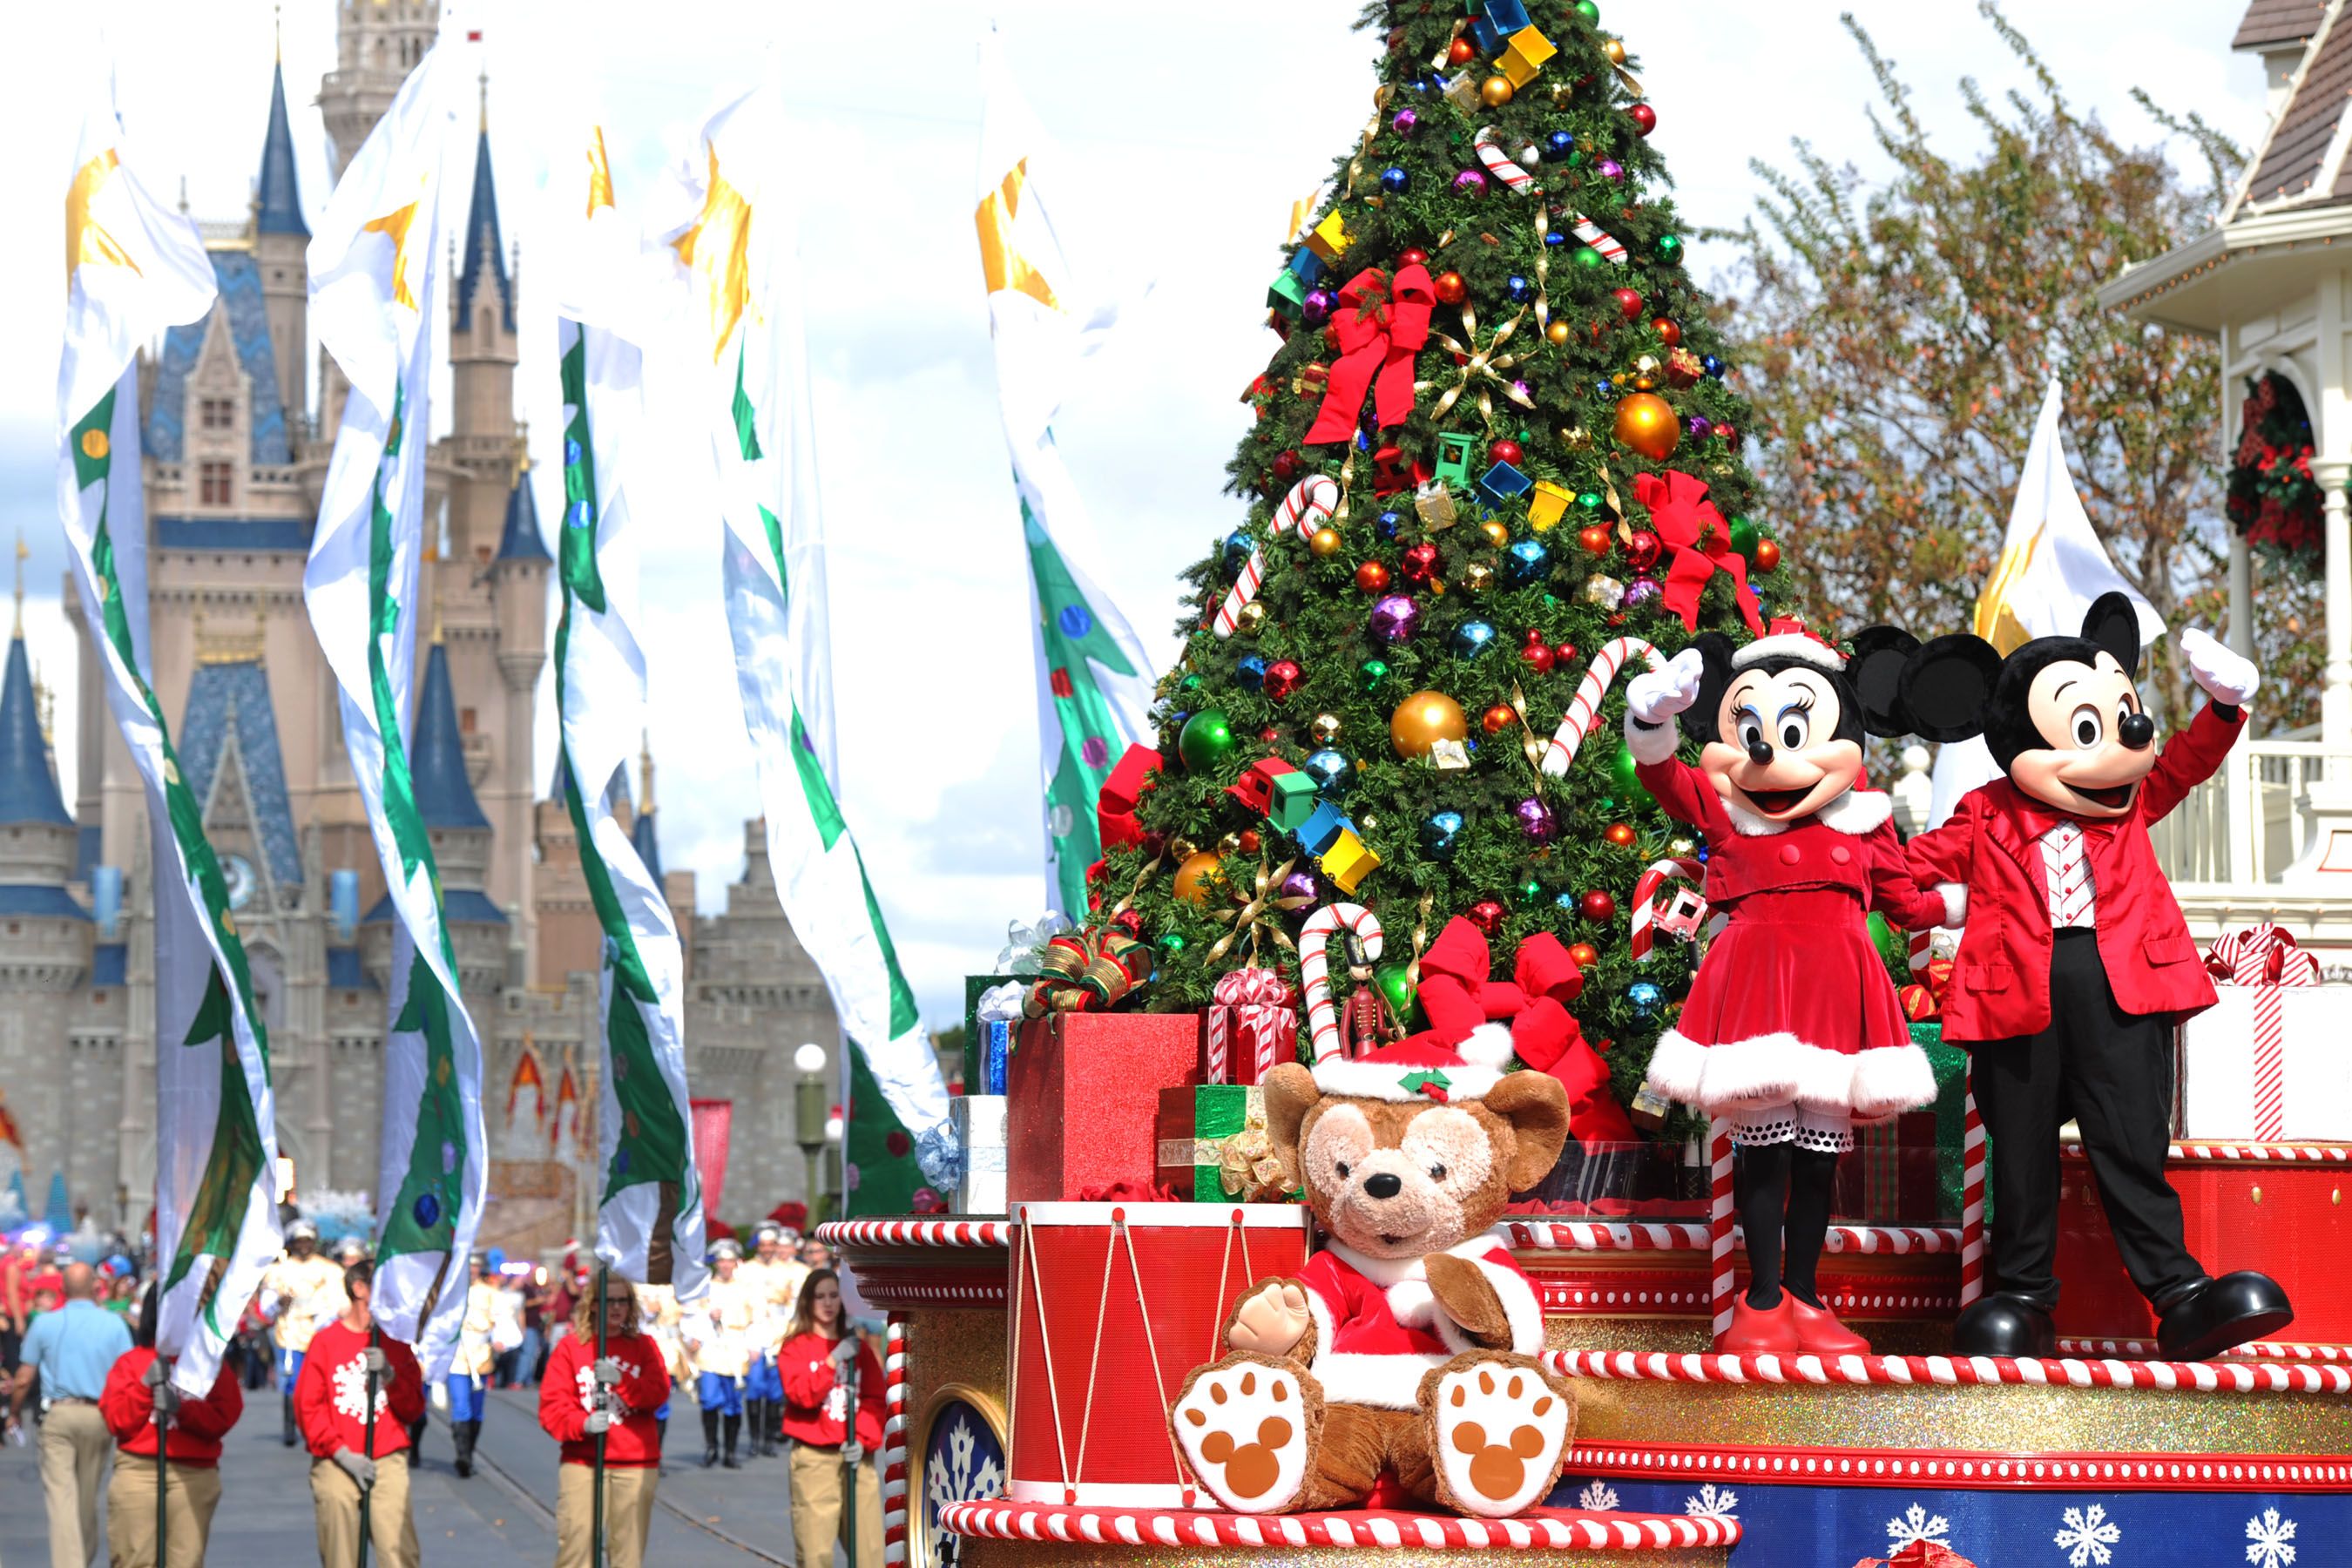 Heres What Its Really Like to Spend Christmas at Disney